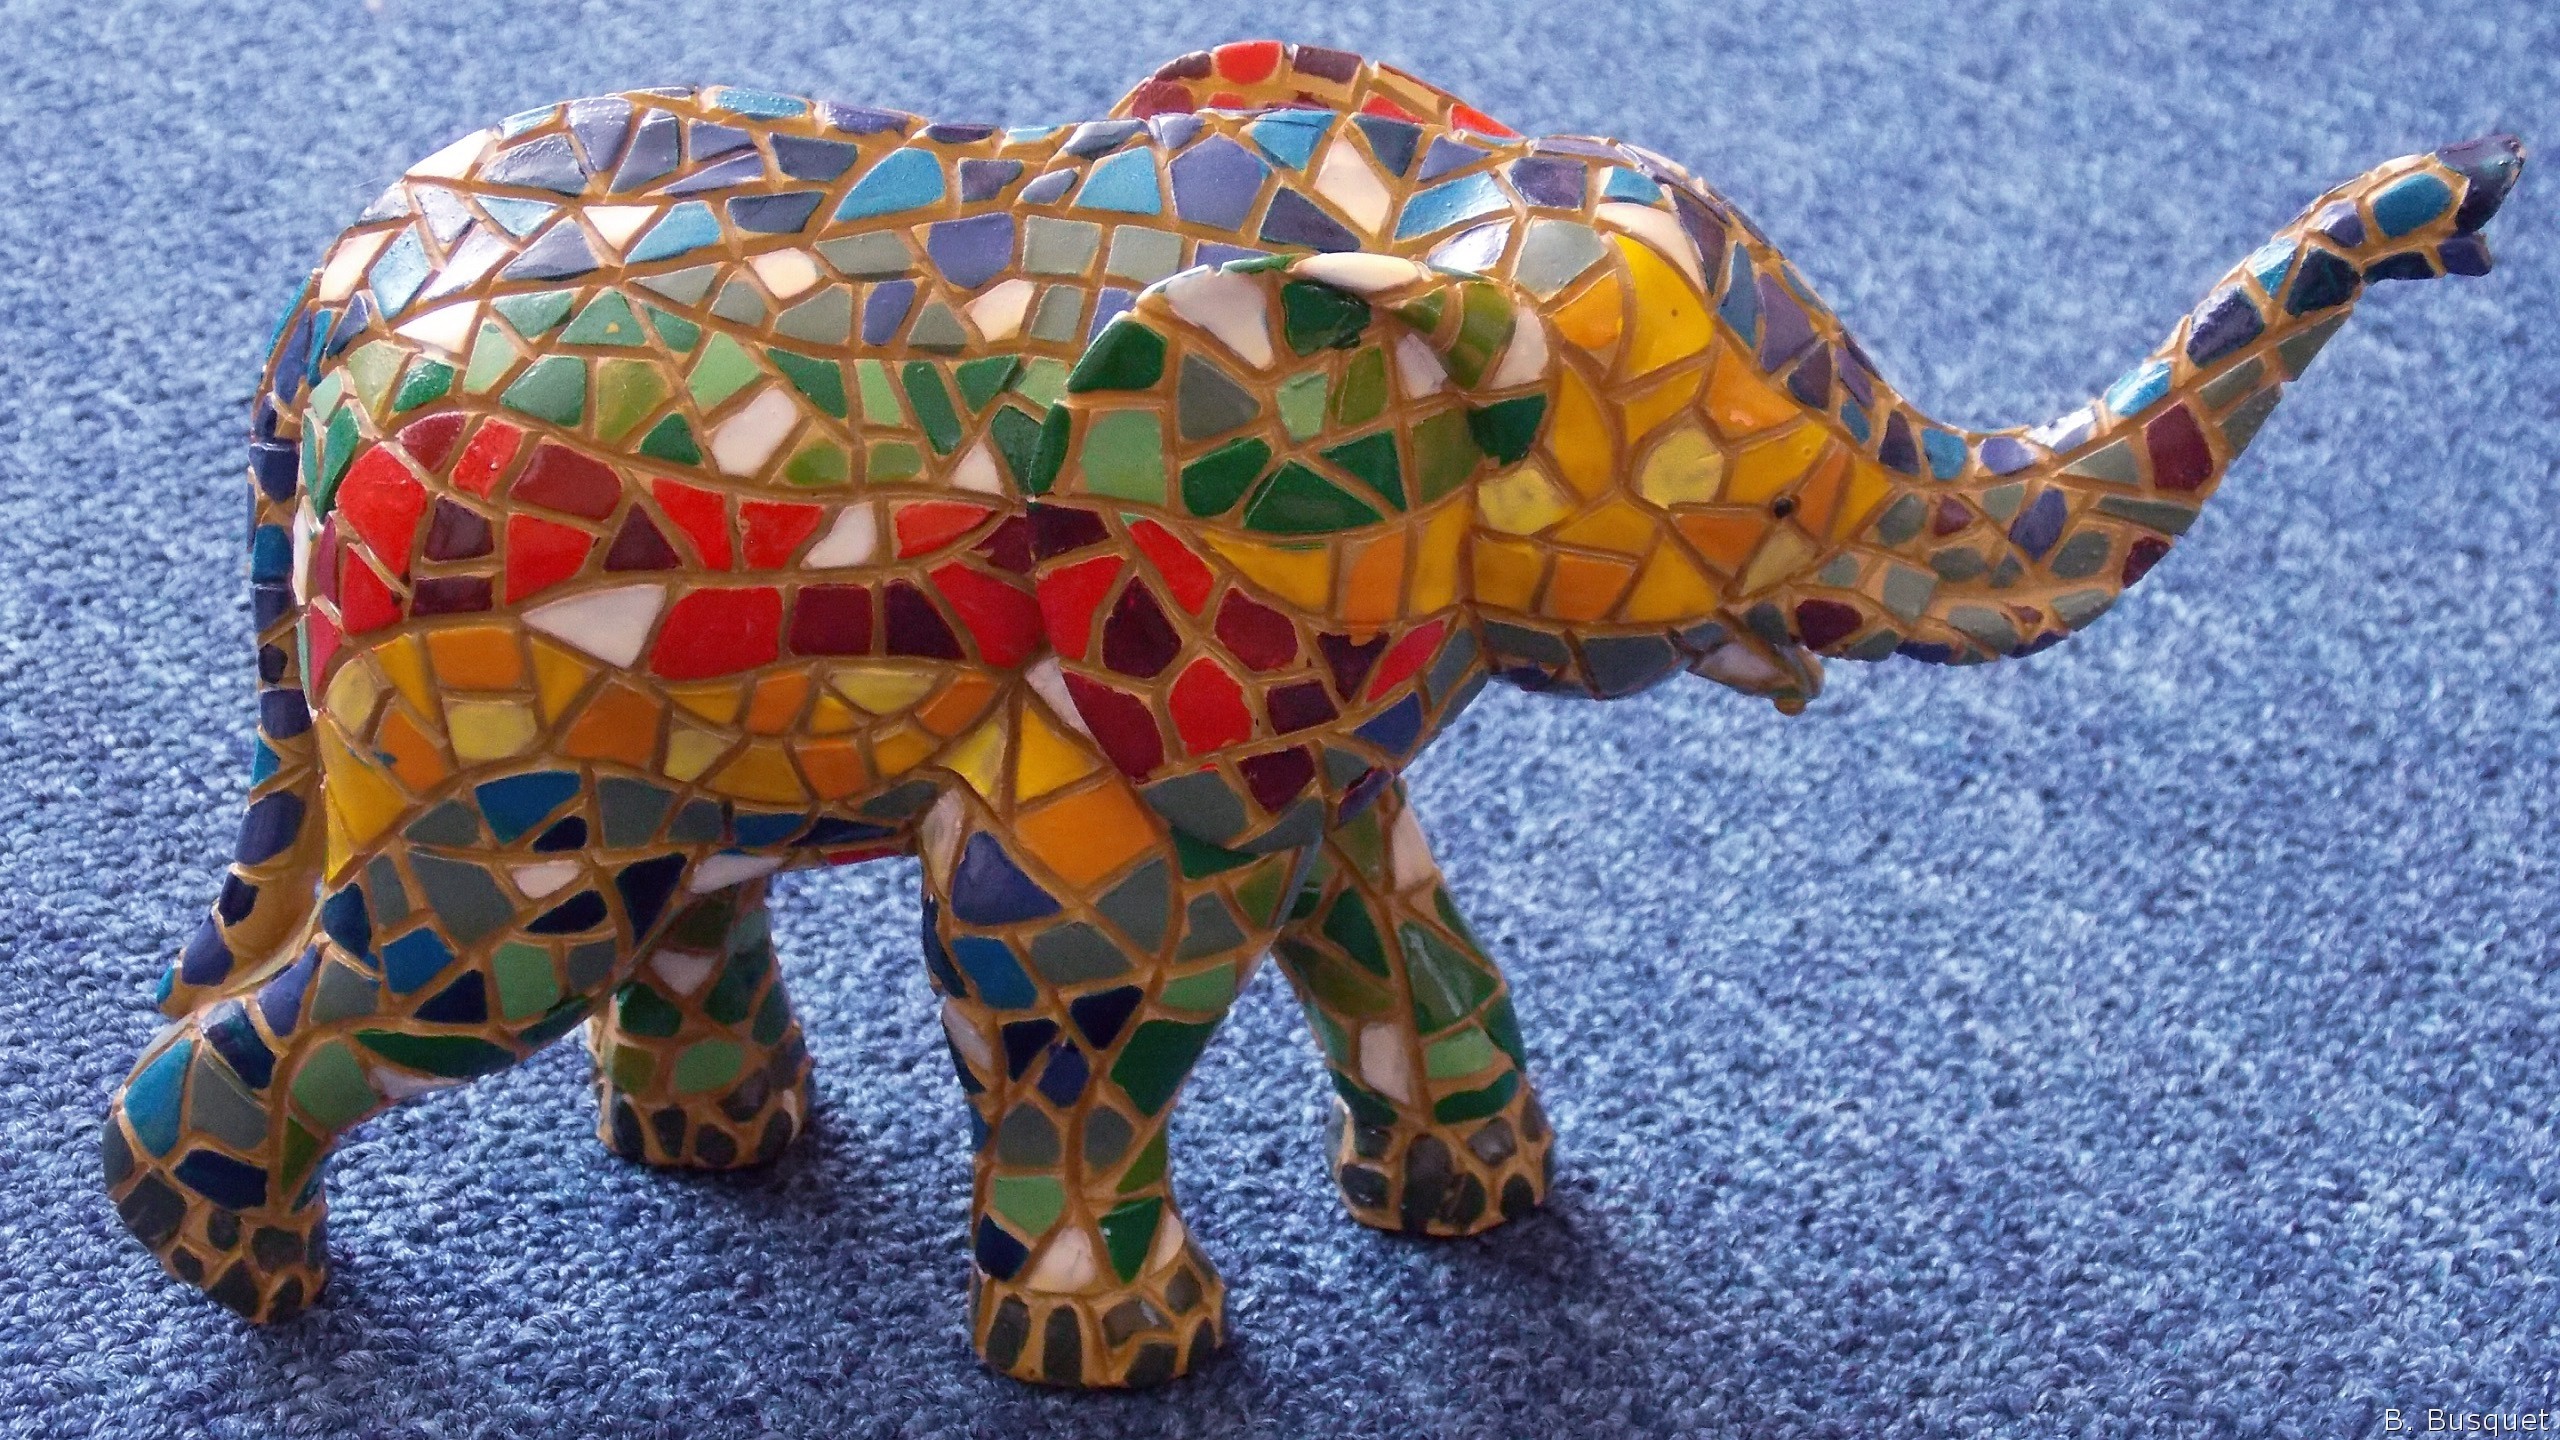 HD-wallpaper-with-colorful-mosaic-elephant